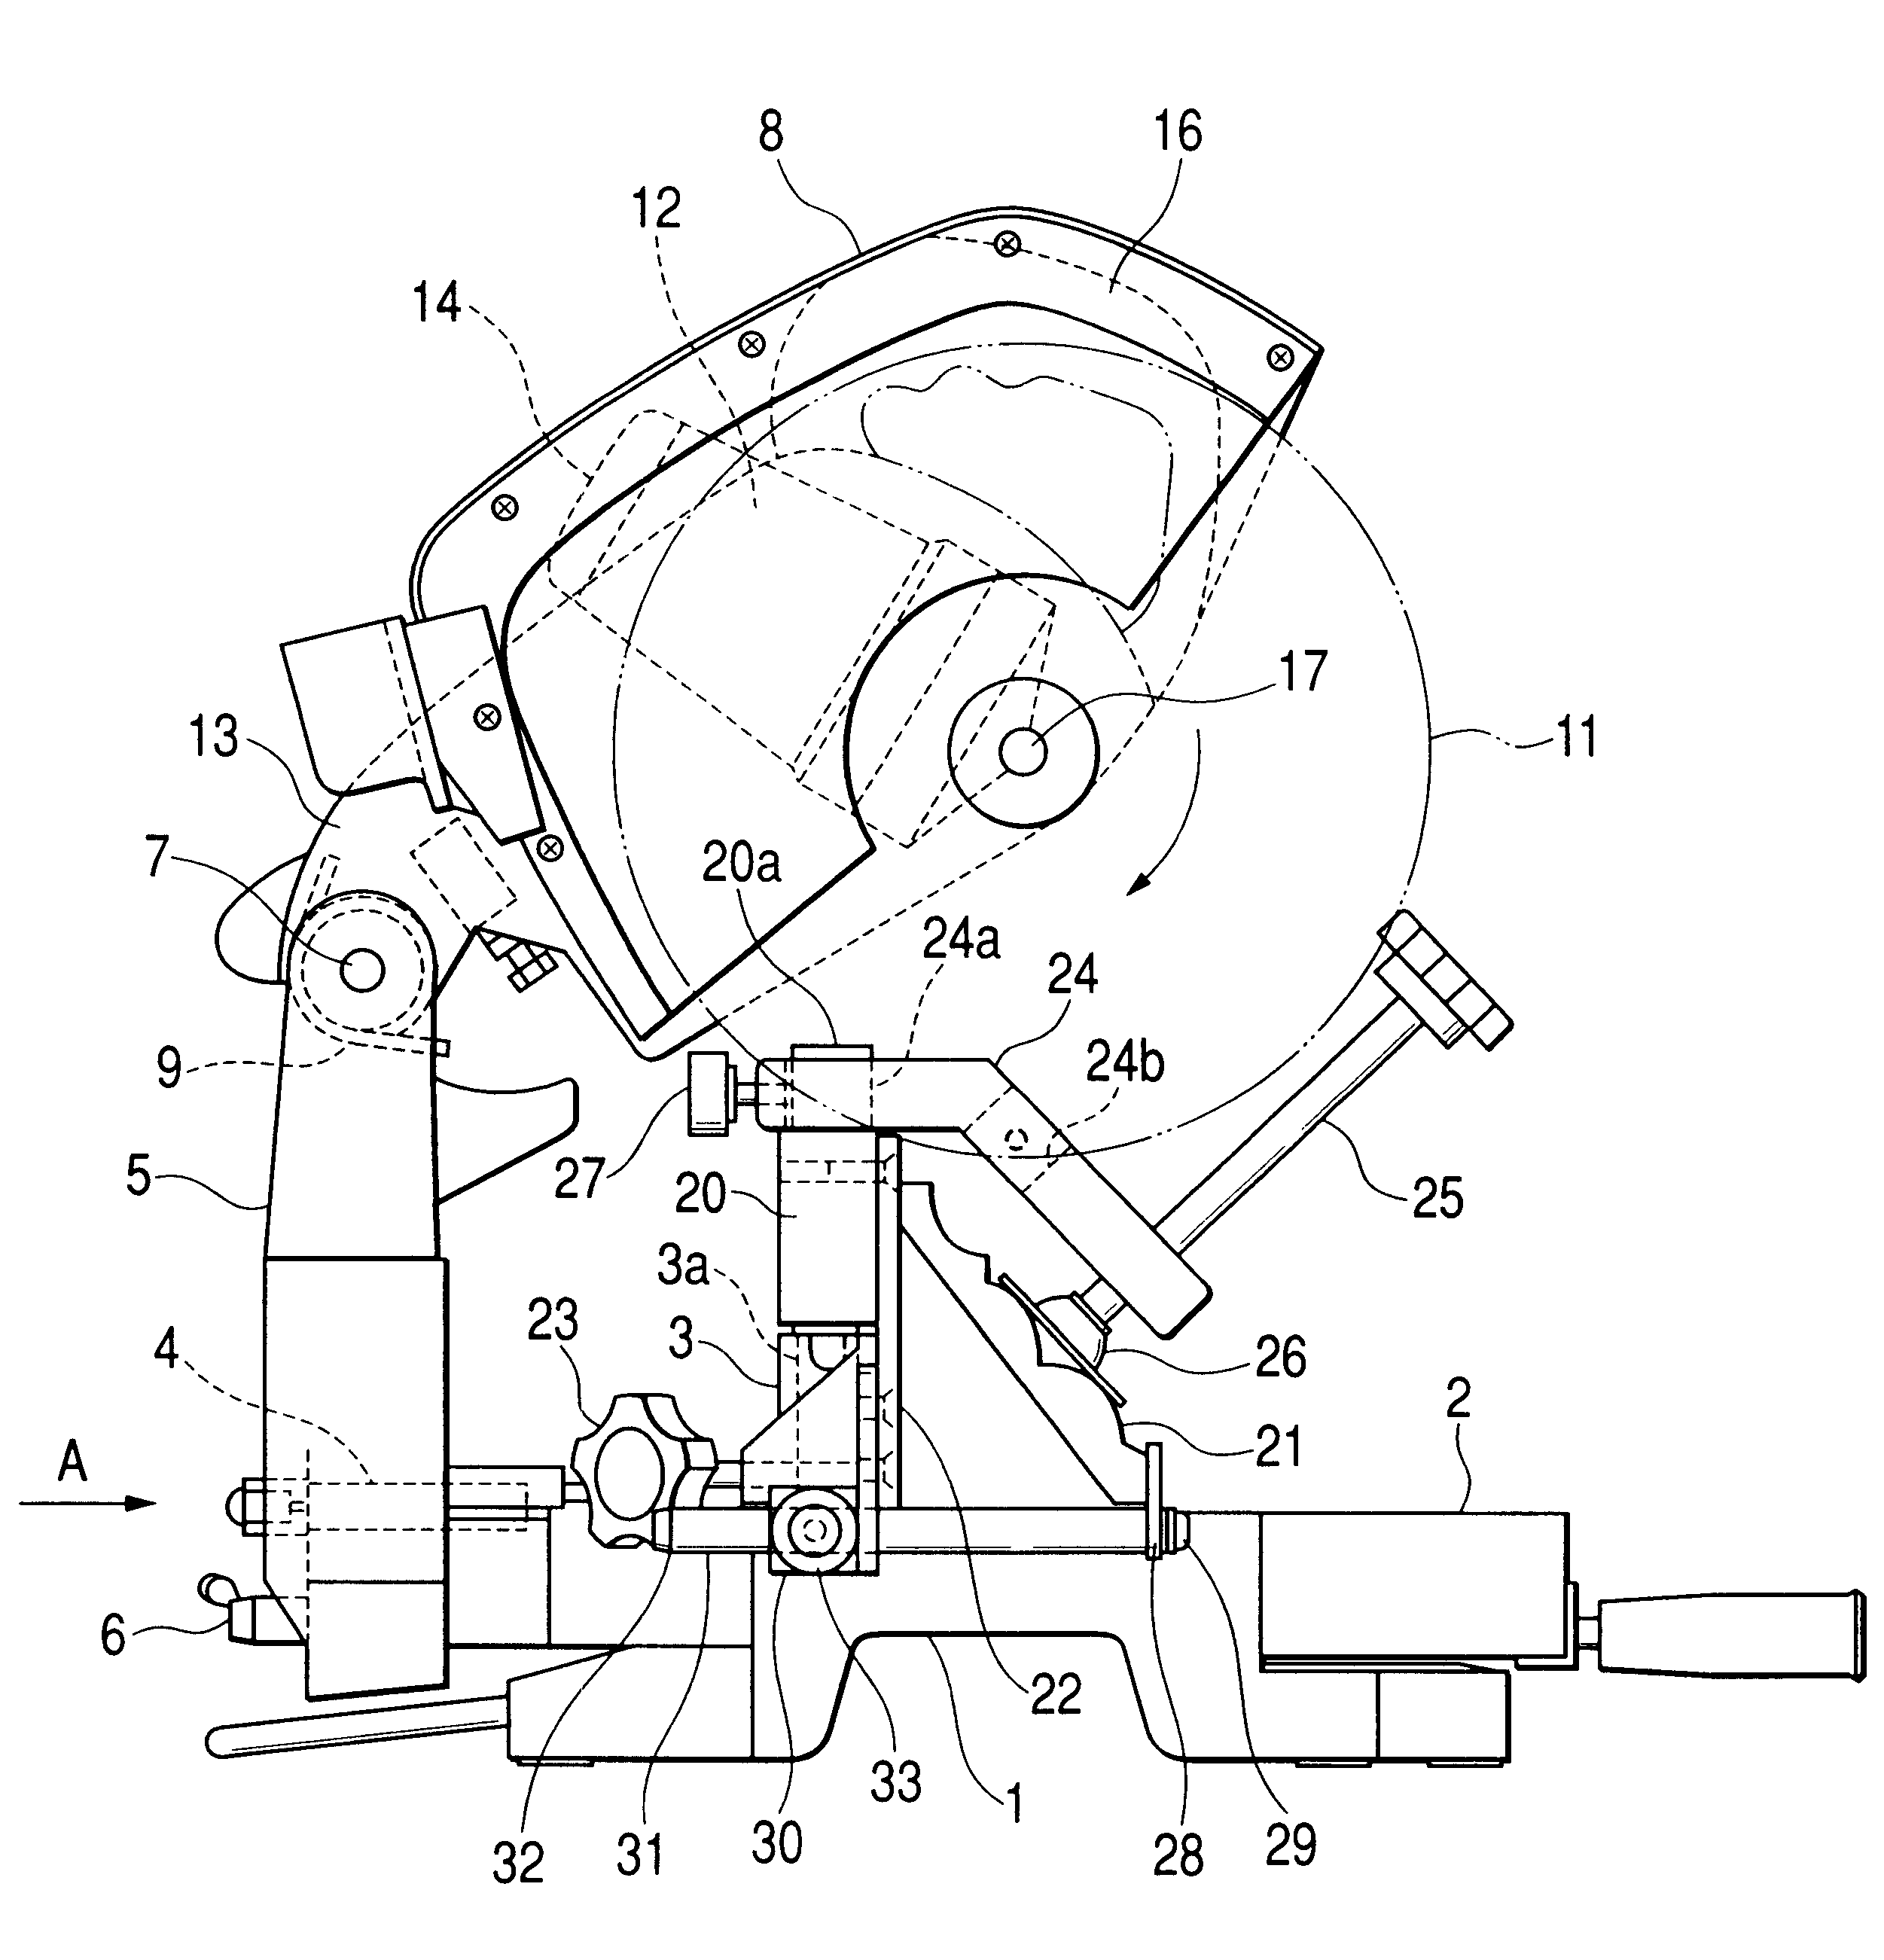 Vice device in compound miter saw